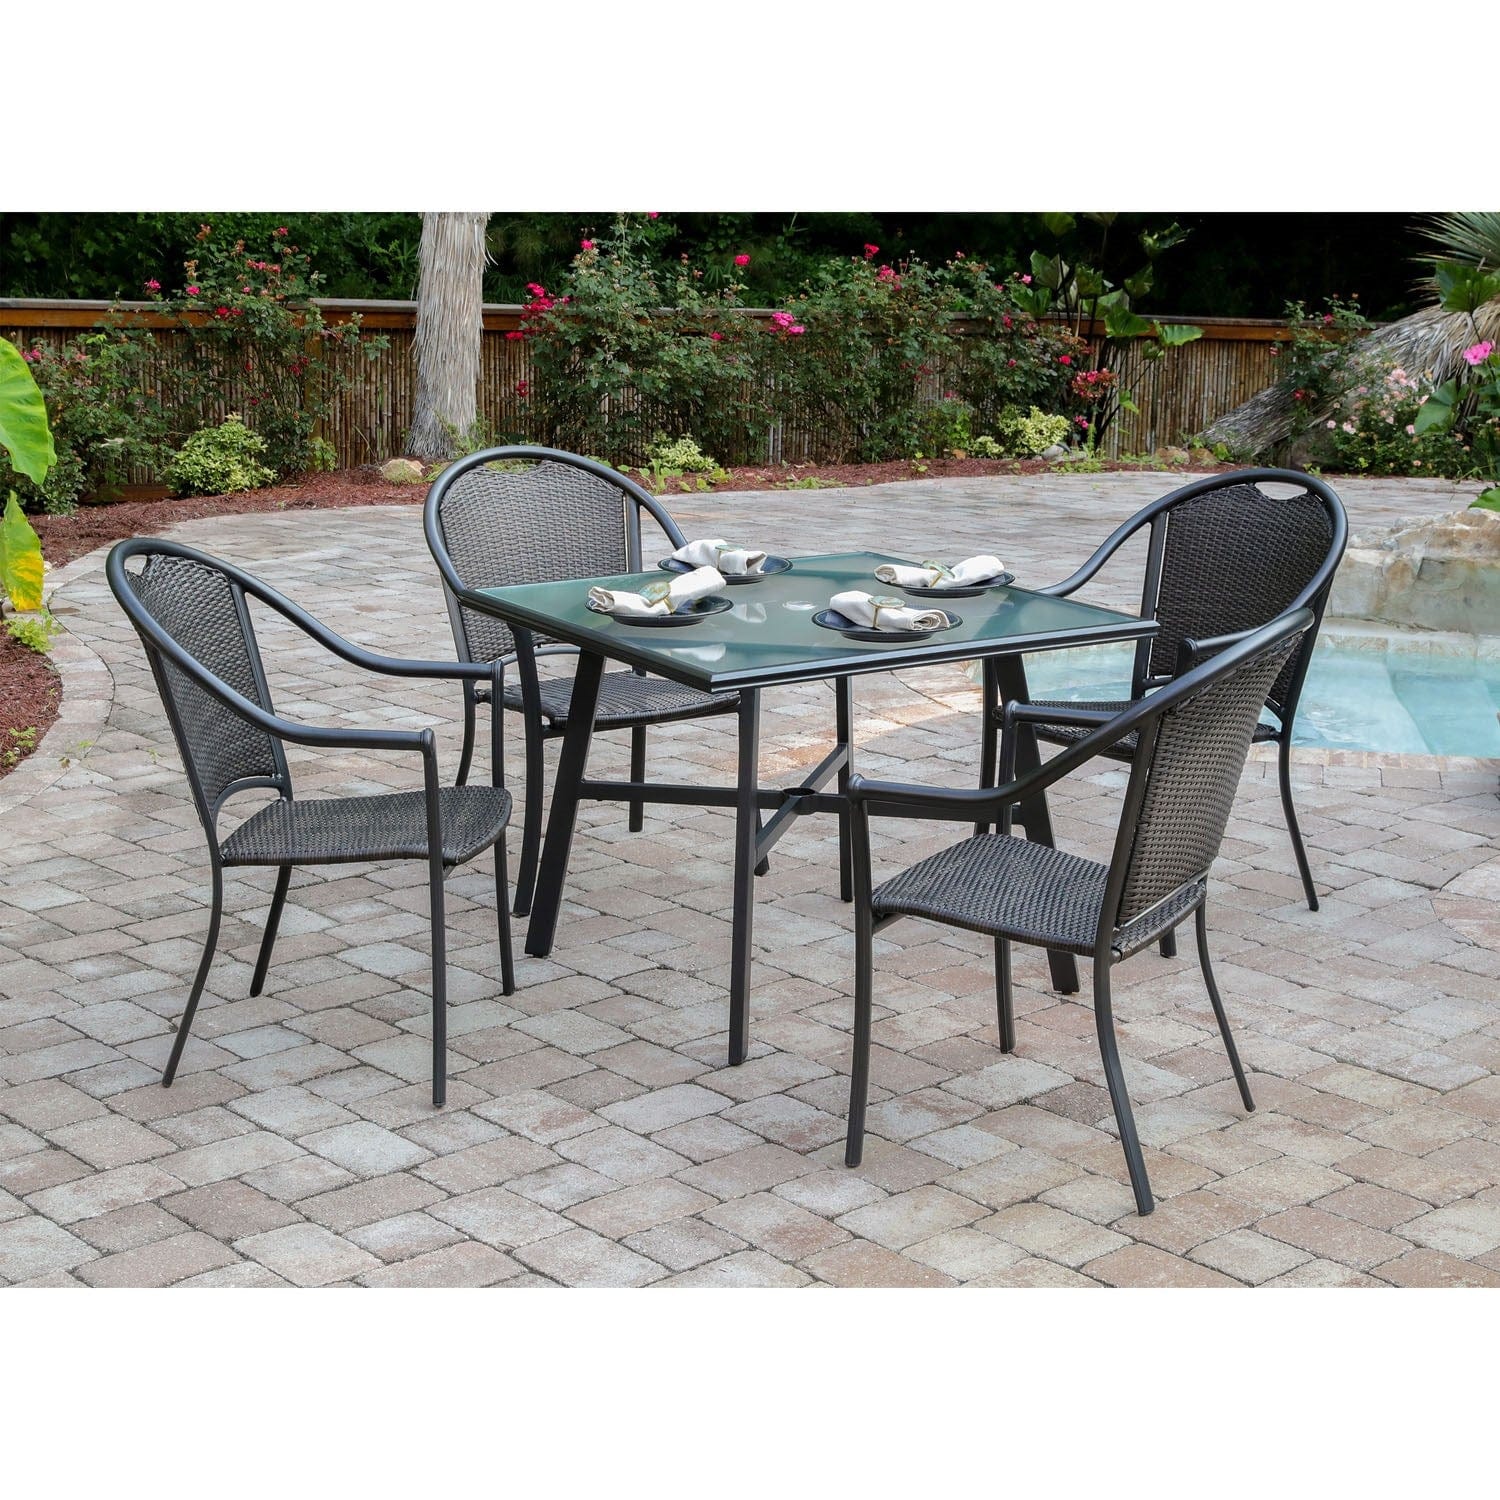 Hanover Outdoor Dining Set Hanover - Bambray 5 Piece Dining Set | 4 Woven Dining Chairs | 1 38" Sq Glass Table | Brown | BAMDN5PCG